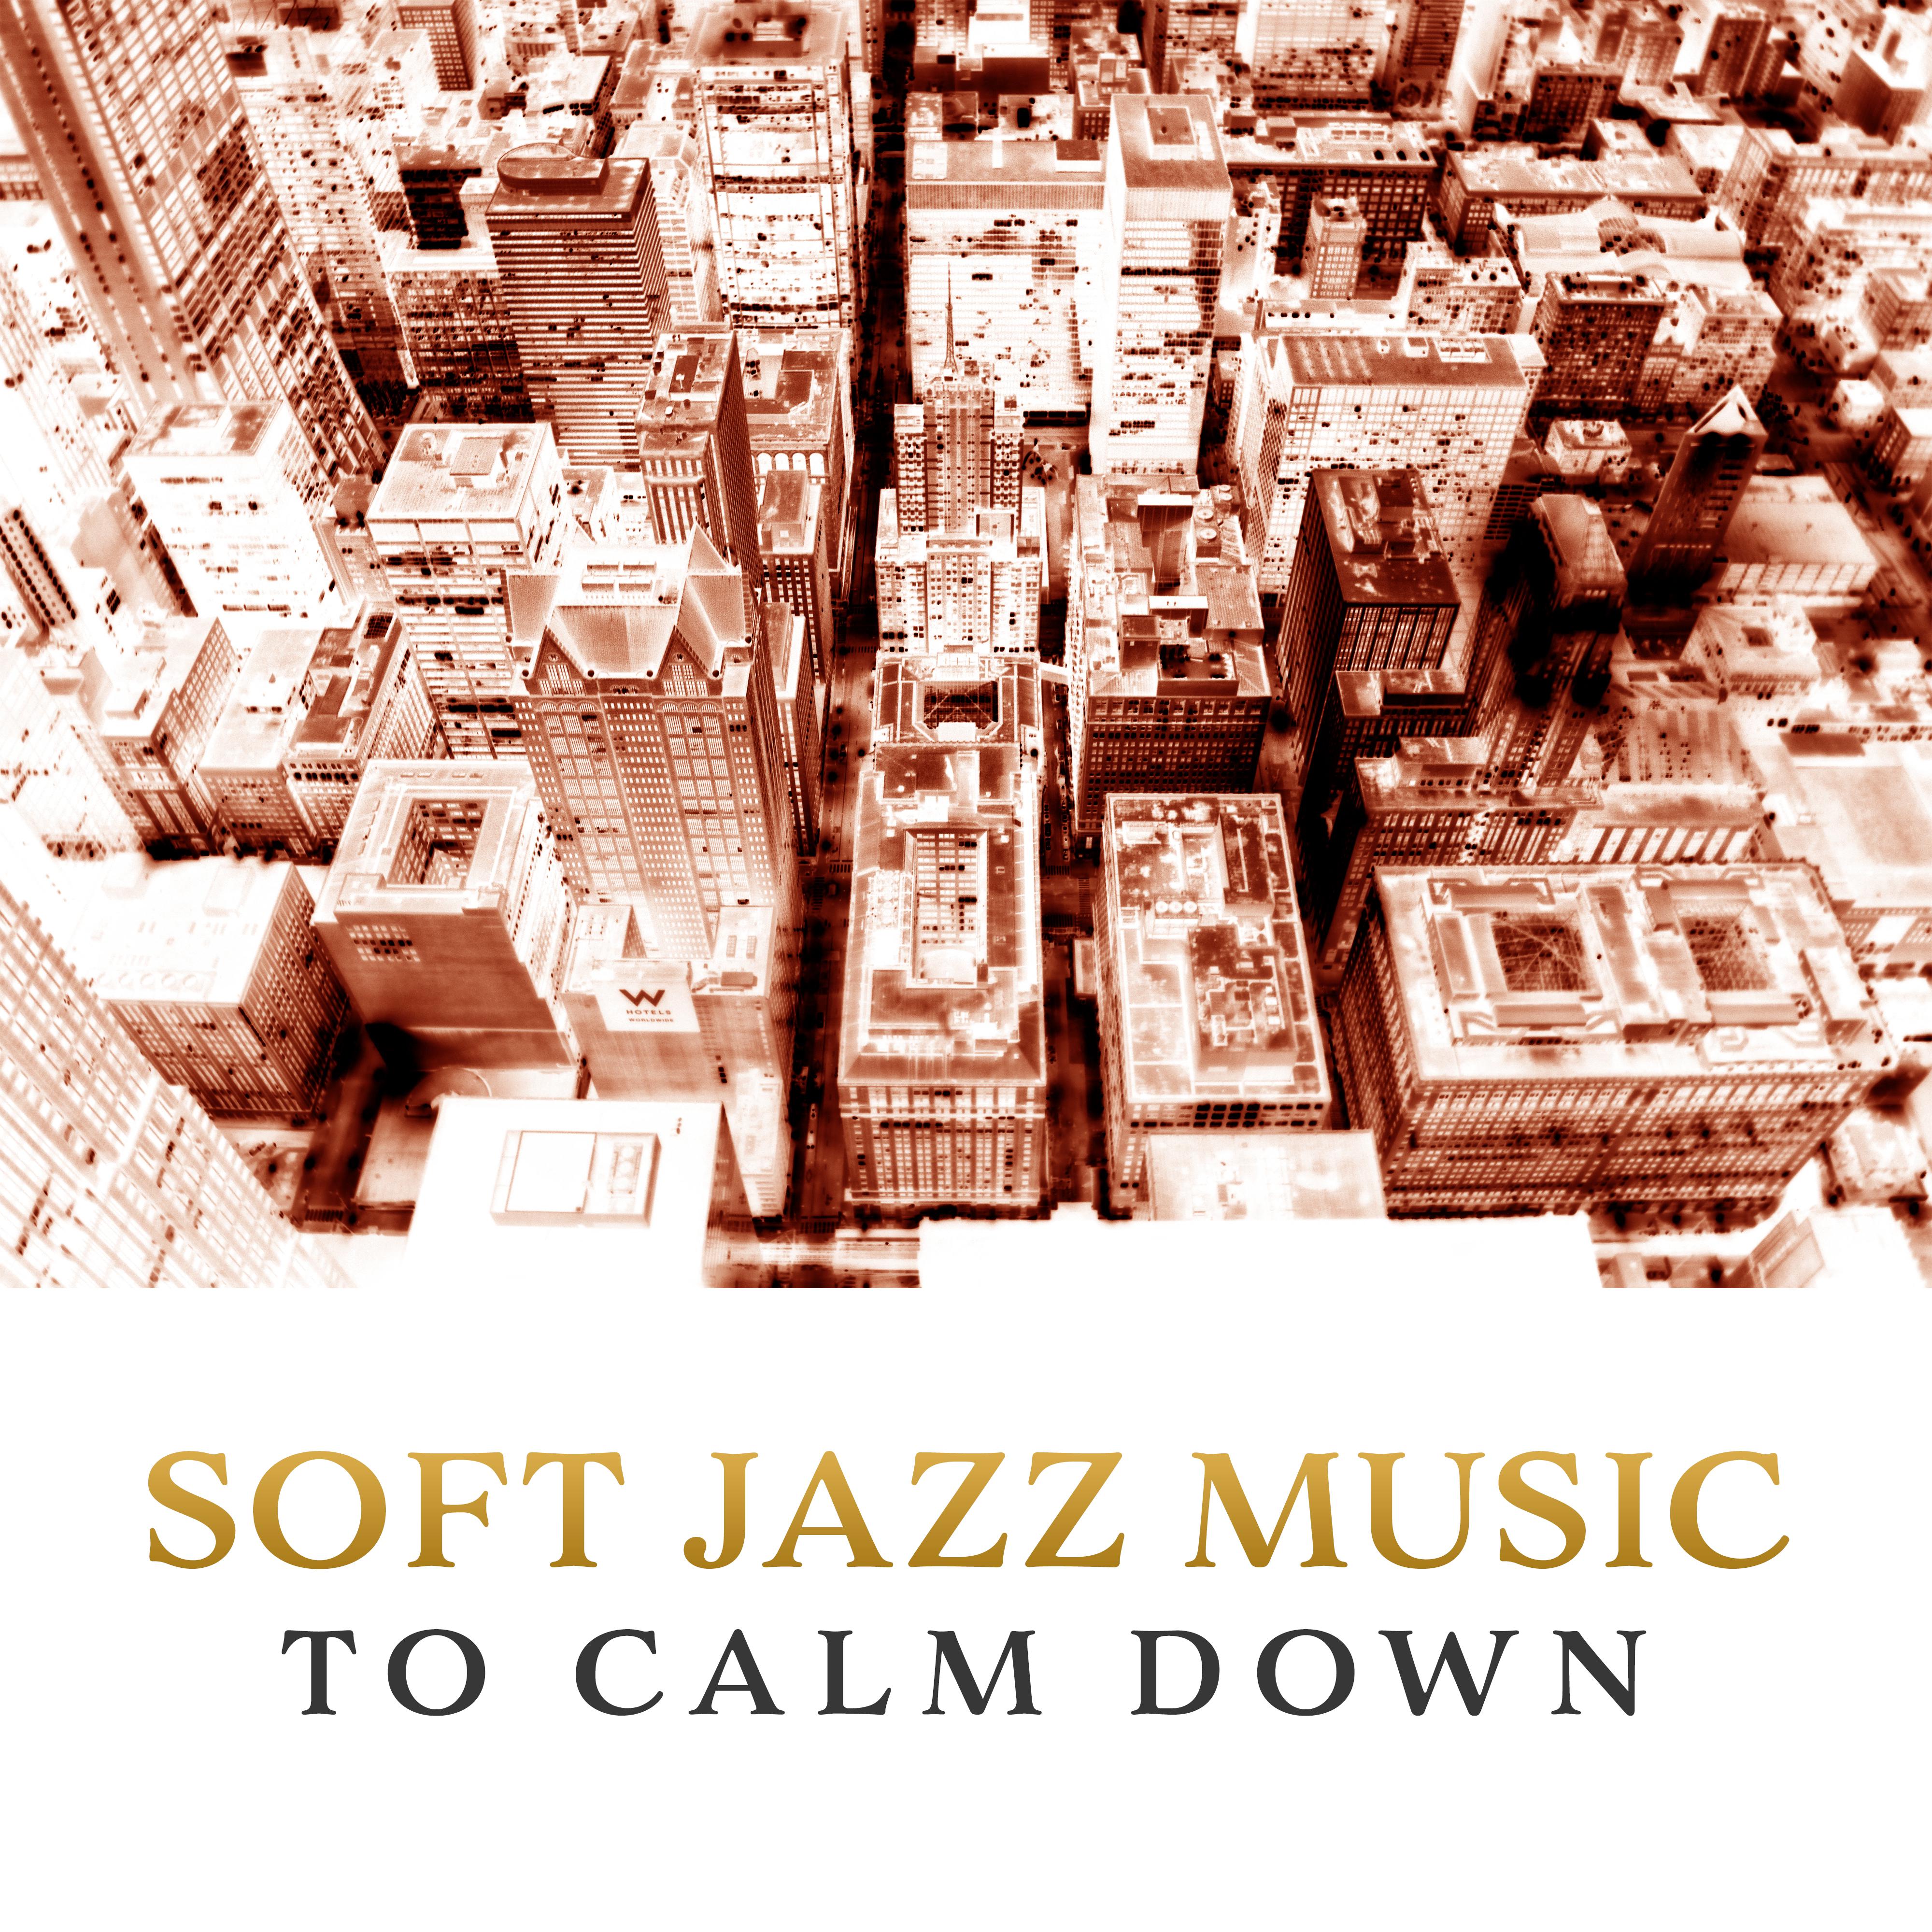 Soft Jazz Music to Calm Down – Easy Listening Jazz Music, Piano Relaxation, Instrumental Sounds to Rest